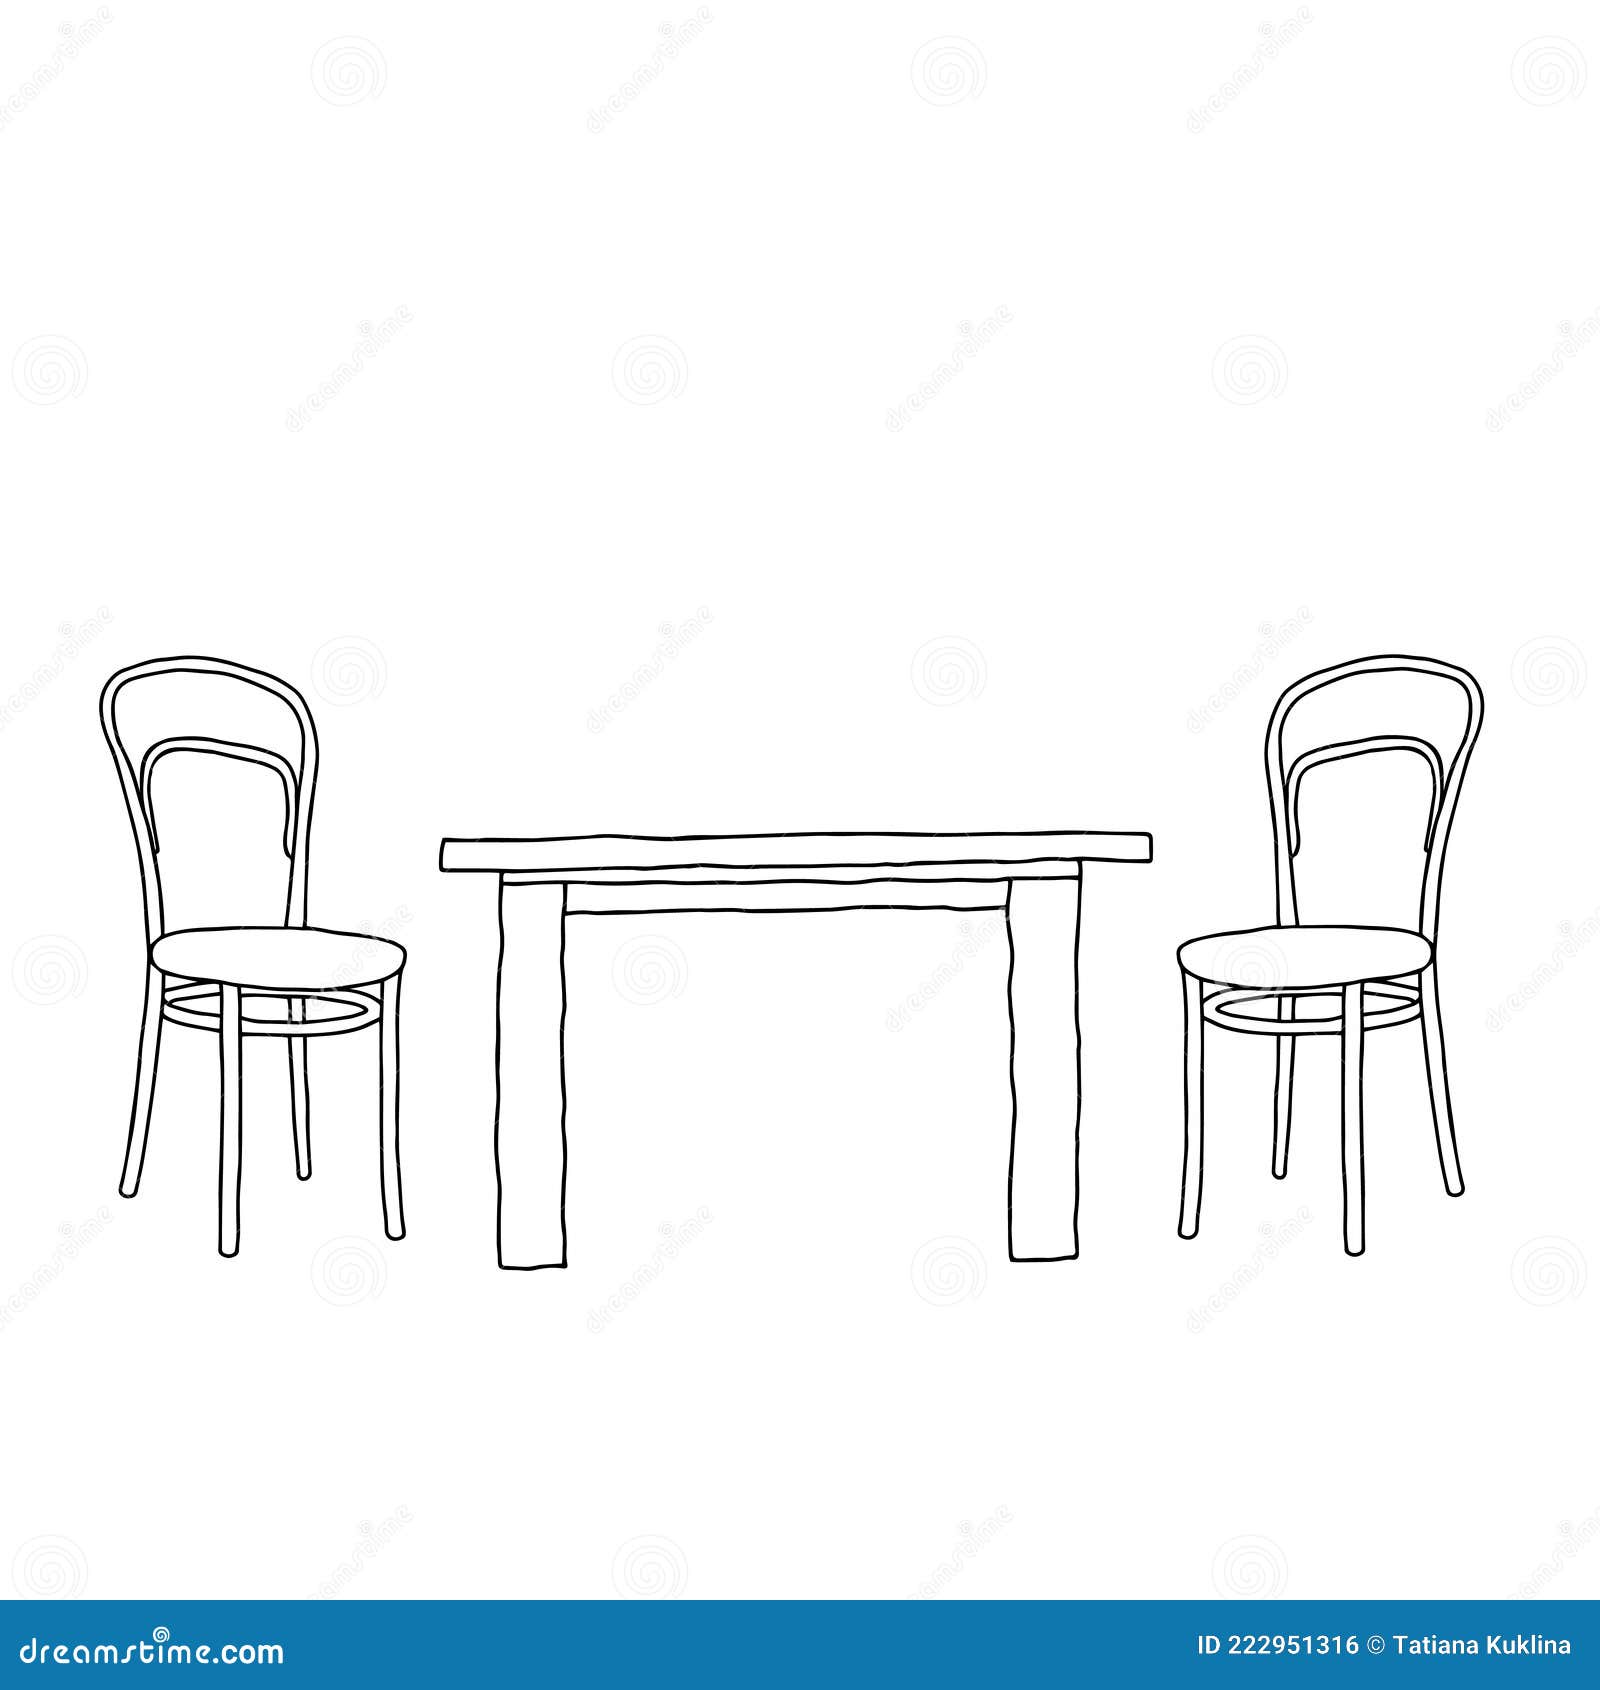 Black Vector Outline Illustration of a Room with a Table and a Pair of ...